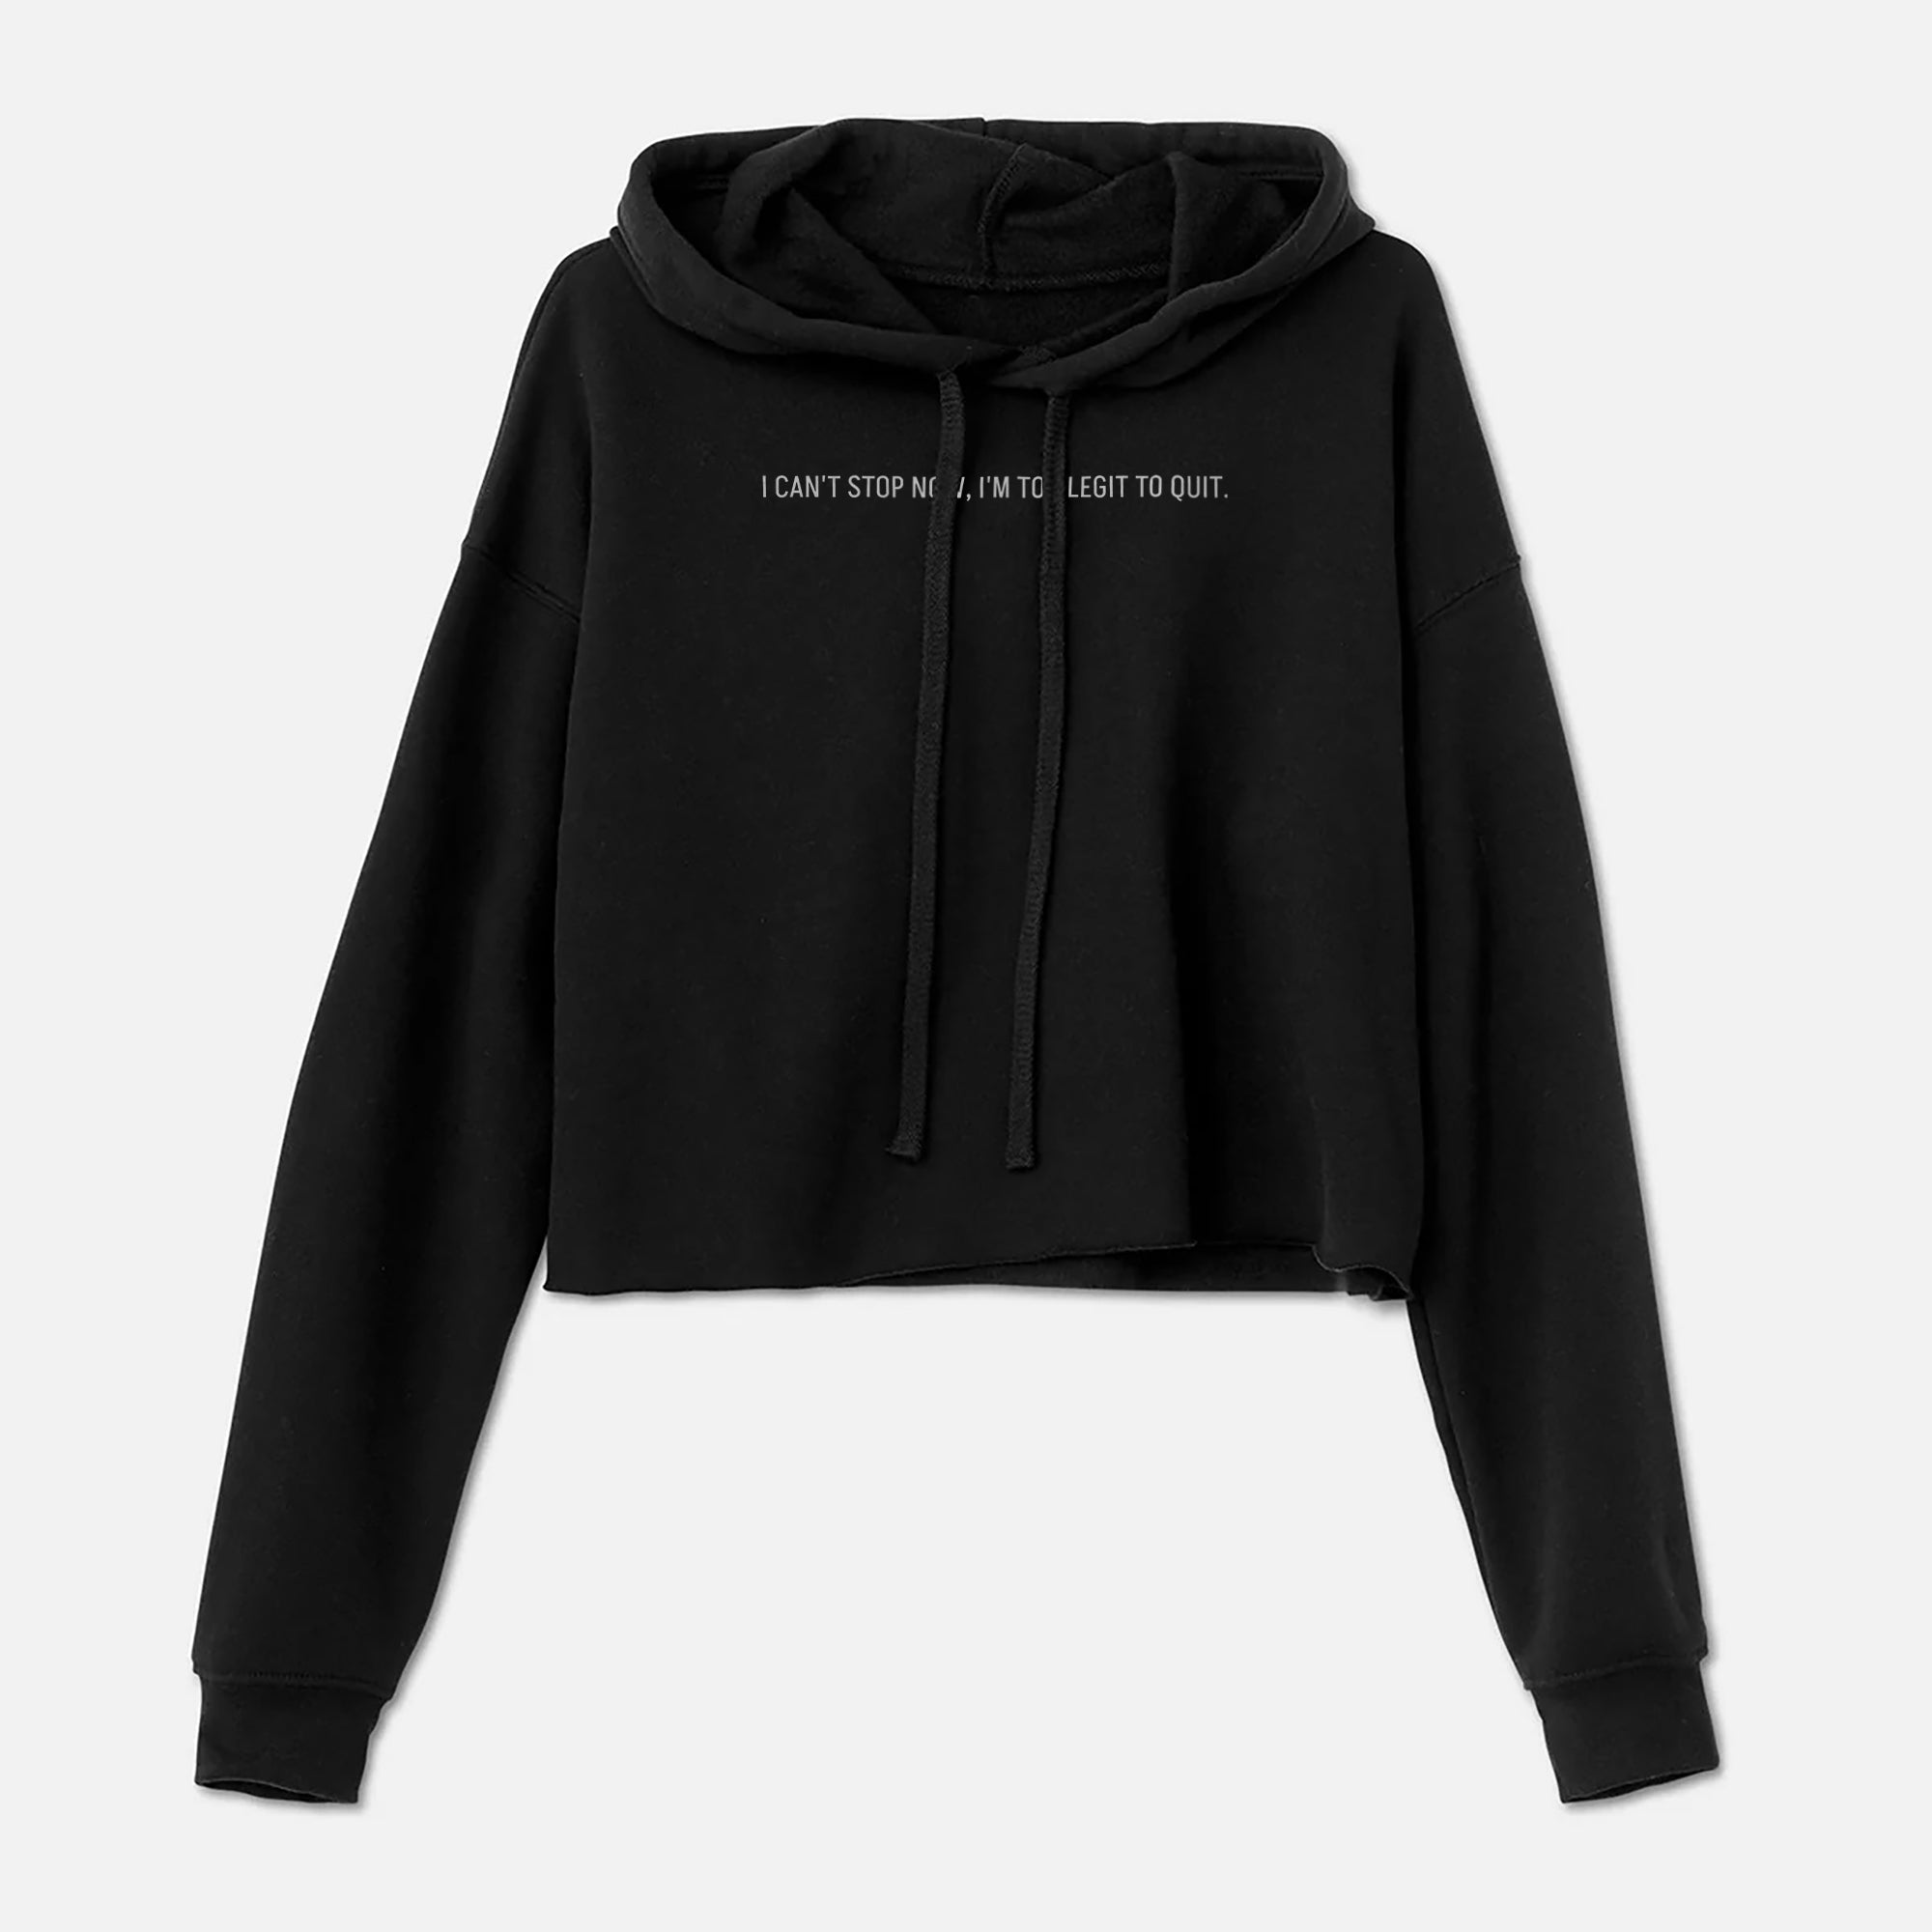 Can't Stop Now, Too Legit to Quit Cropped Hoodie Solid Black Image